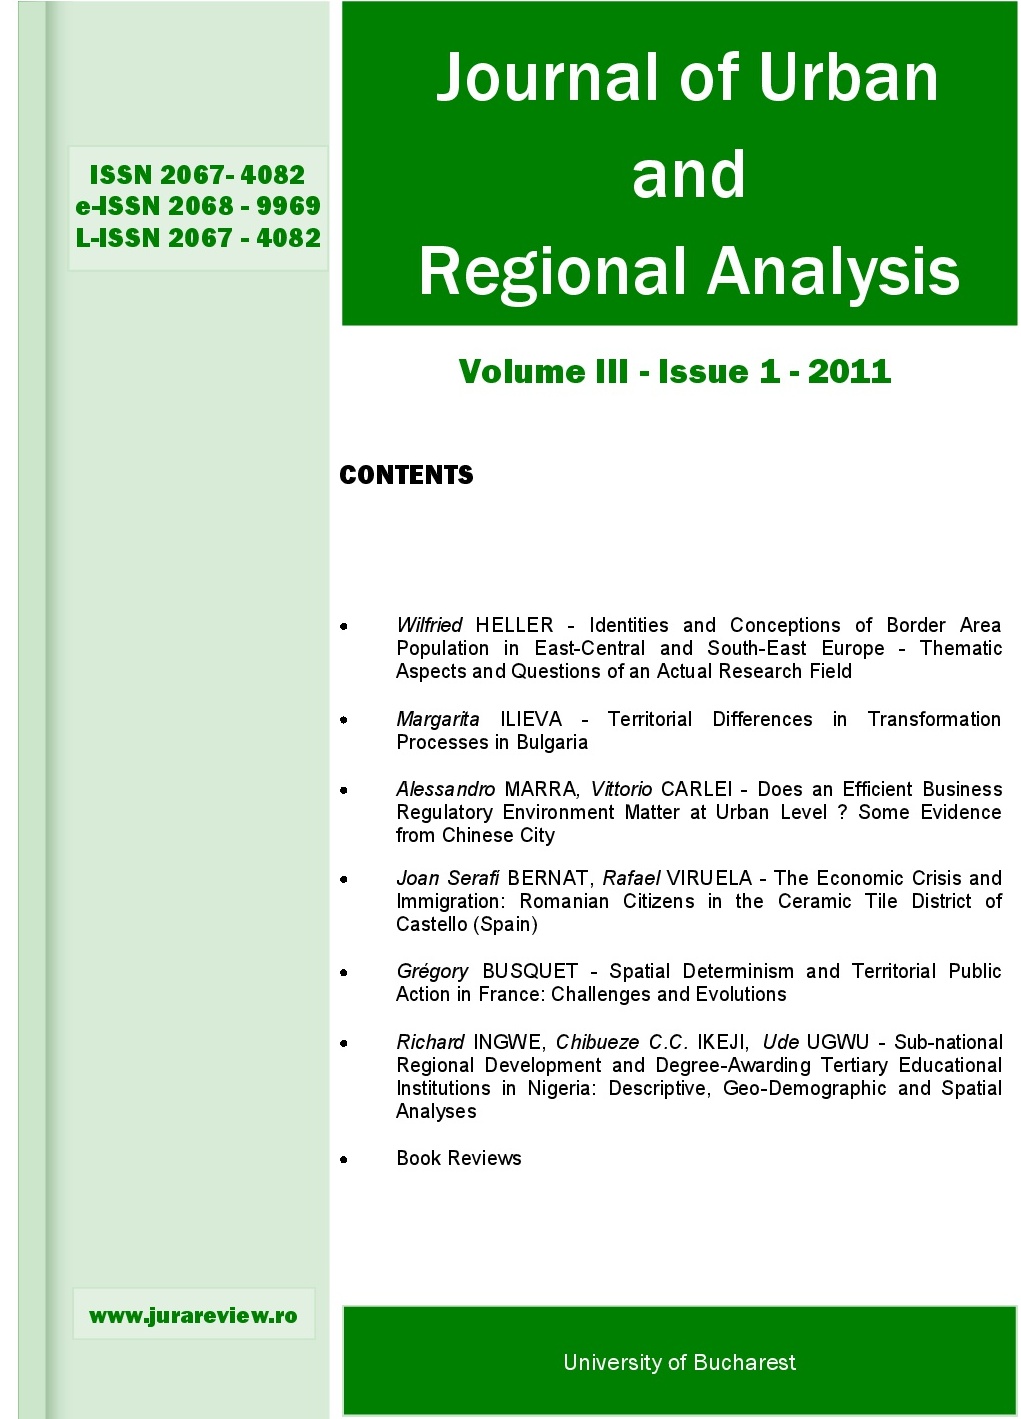 SUB-NATIONAL REGIONAL DEVELOPMENT AND DEGREEAWARDING TERTIARY EDUCATIONAL INSTITUTIONS IN NIGERIA: DESCRIPTIVE, GEO-DEMOGRAPHIC AND GEO-SPATIAL ANALYSES Cover Image